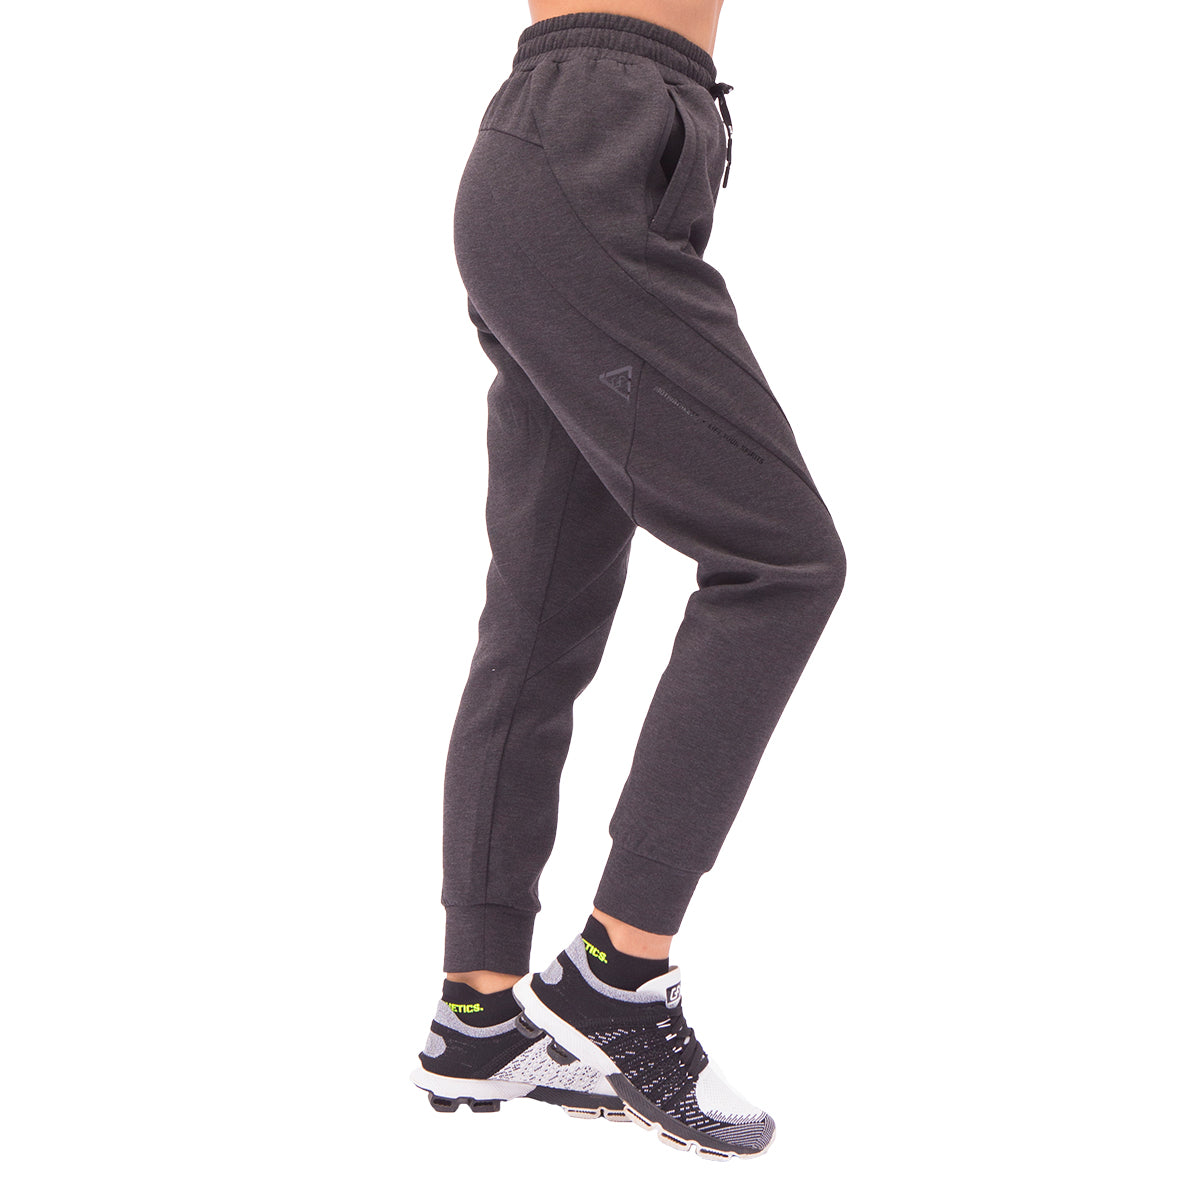 Athleisure Wicking Workout Jogger pants for Women